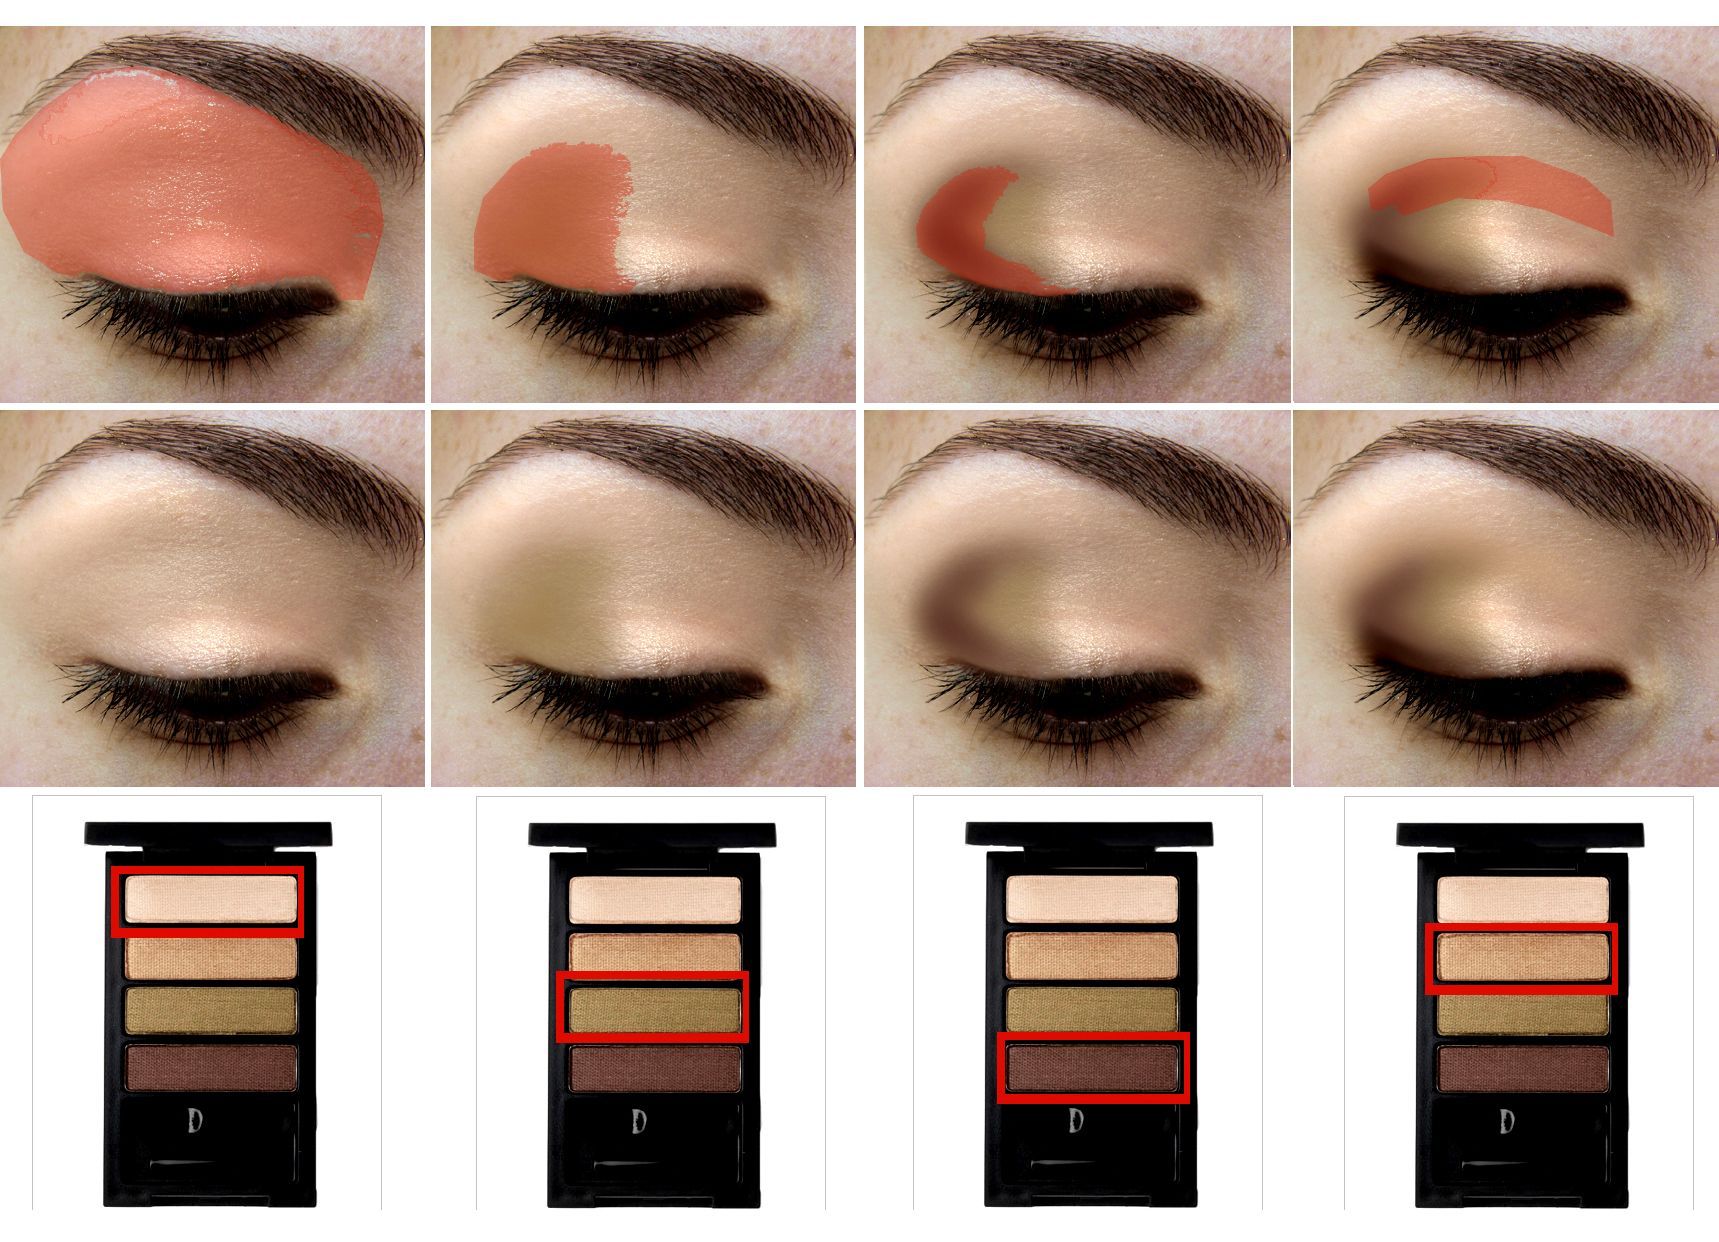 How to apply eye shadow properly – great visual